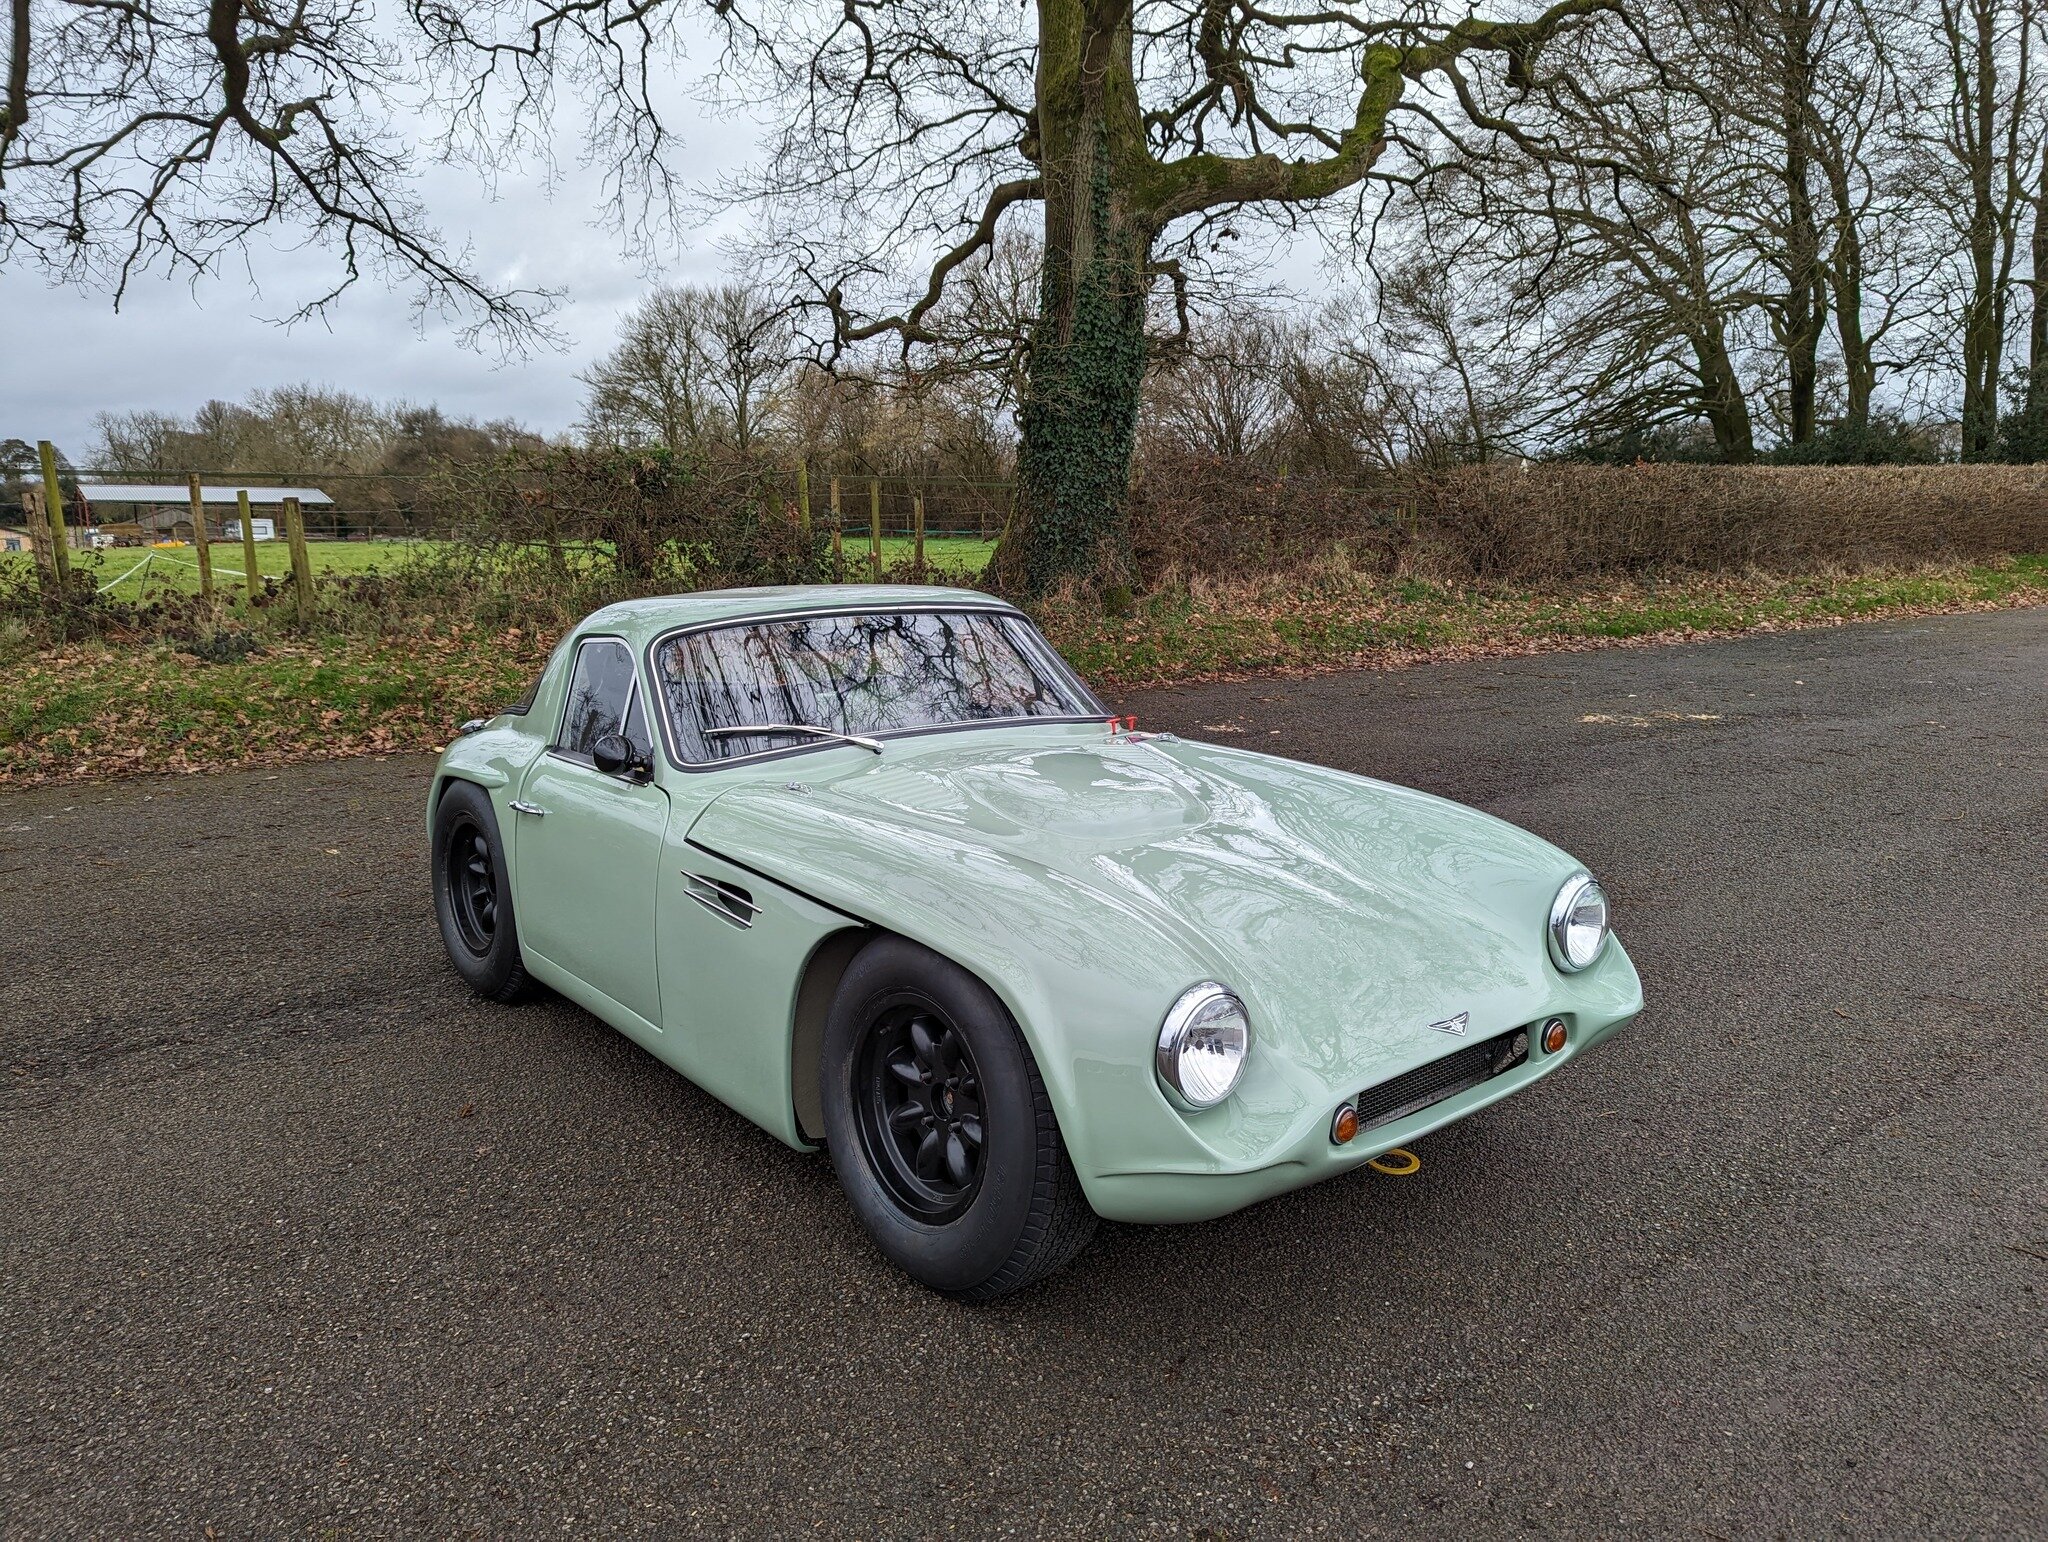 Our TVR Griffith now has a brand new FIA HTP!

Click the link in our bio to find out more.

#retroracecar #vintageracecar #equipeclassicracing #tvr #tvrcars #classiccars #tvrgrantura #tvrgranturamk3 #historicracing #mastershistoricracing #motorsport 